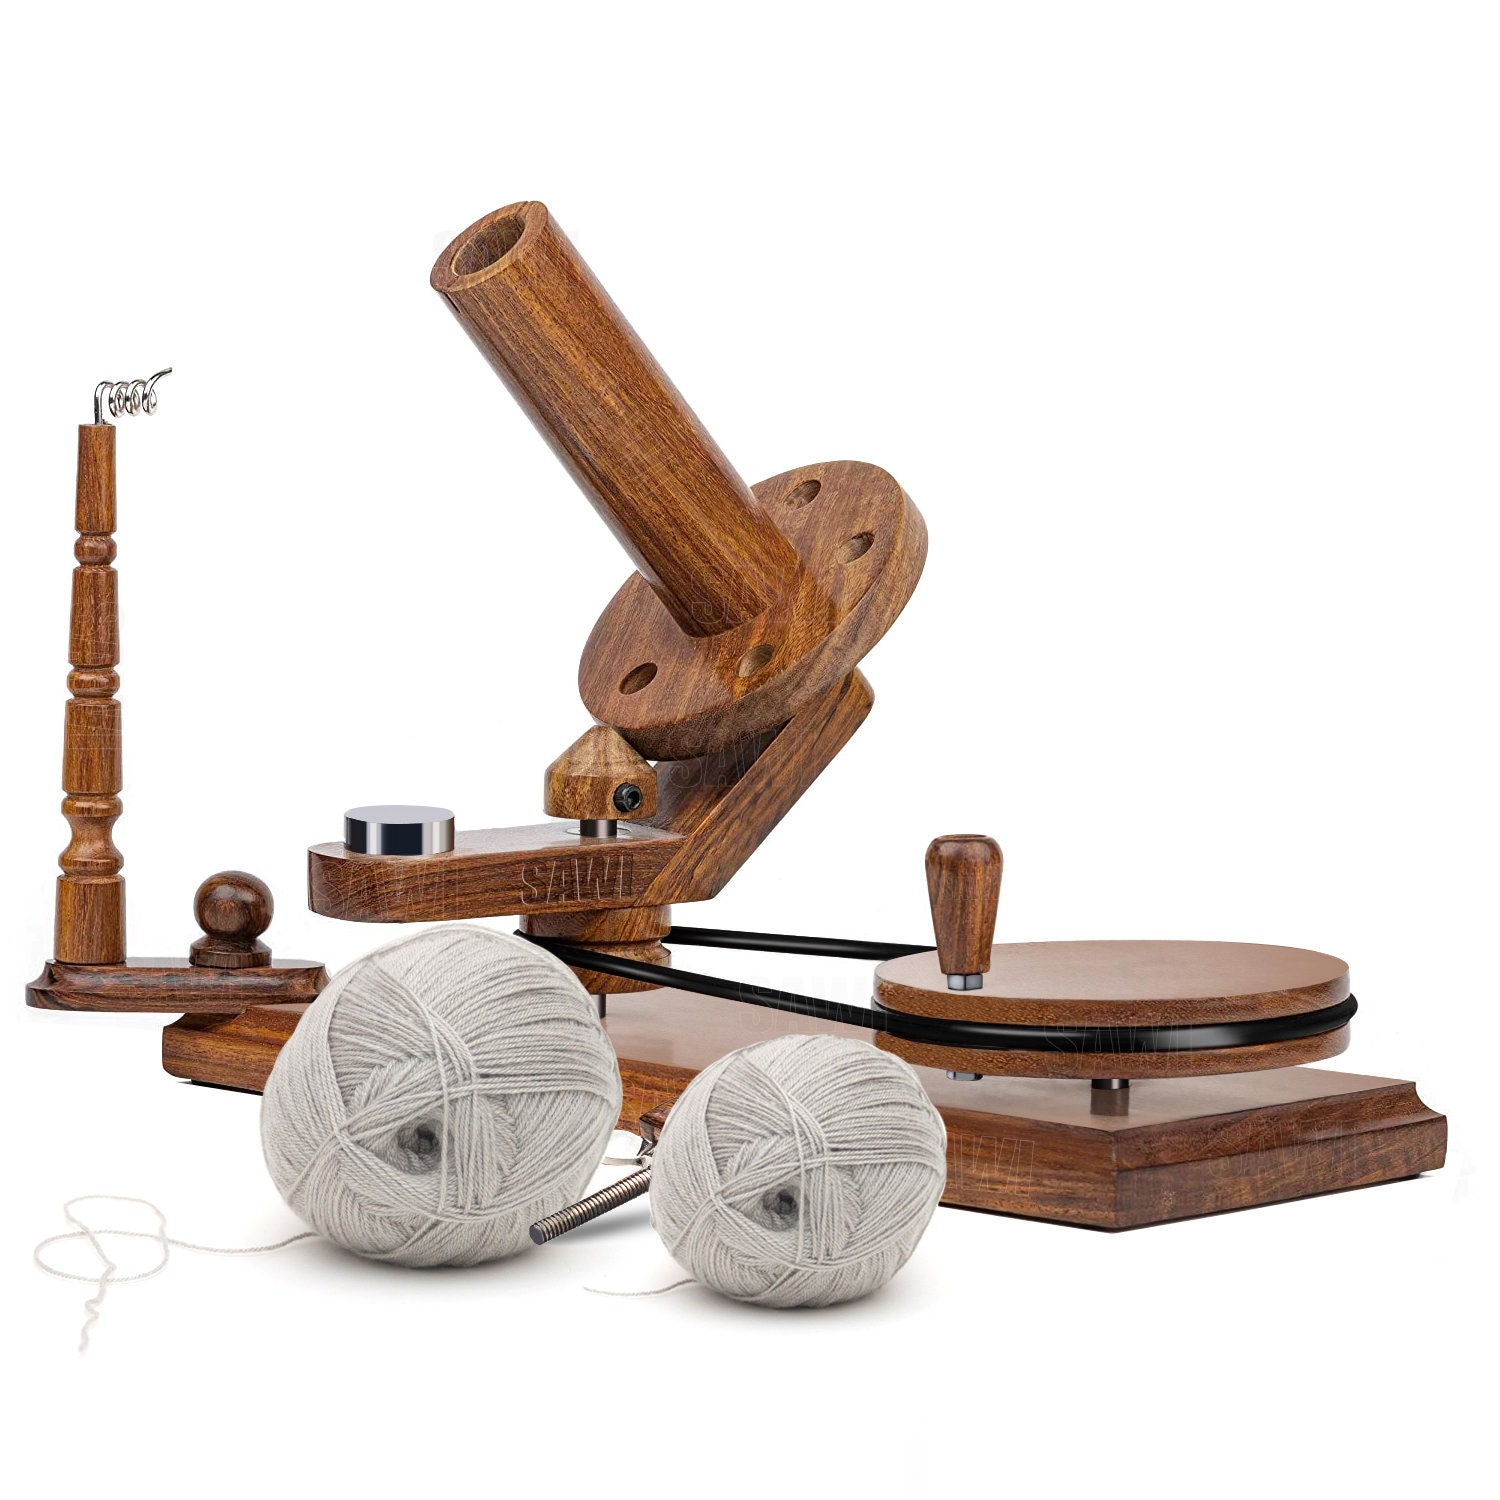 SAWI Wooden Yarn Winder for Knitting and Crocheting